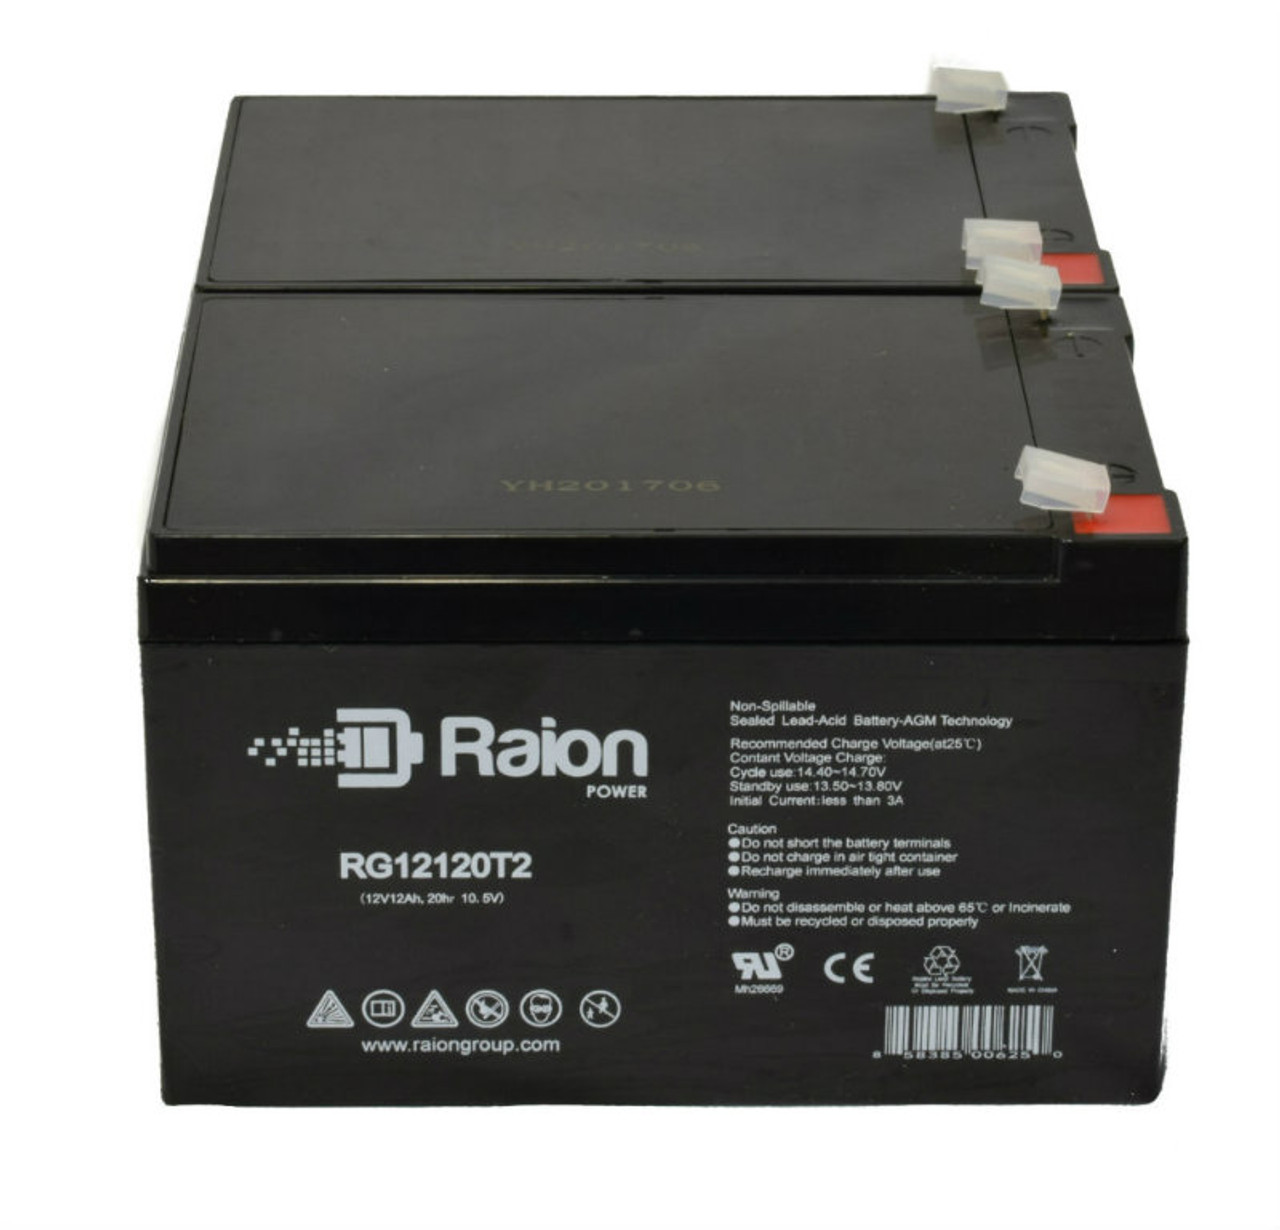 Raion Power 12V 12Ah Non-Spillable Compatible Replacement Battery for XNB SN12010 - (2 Pack)